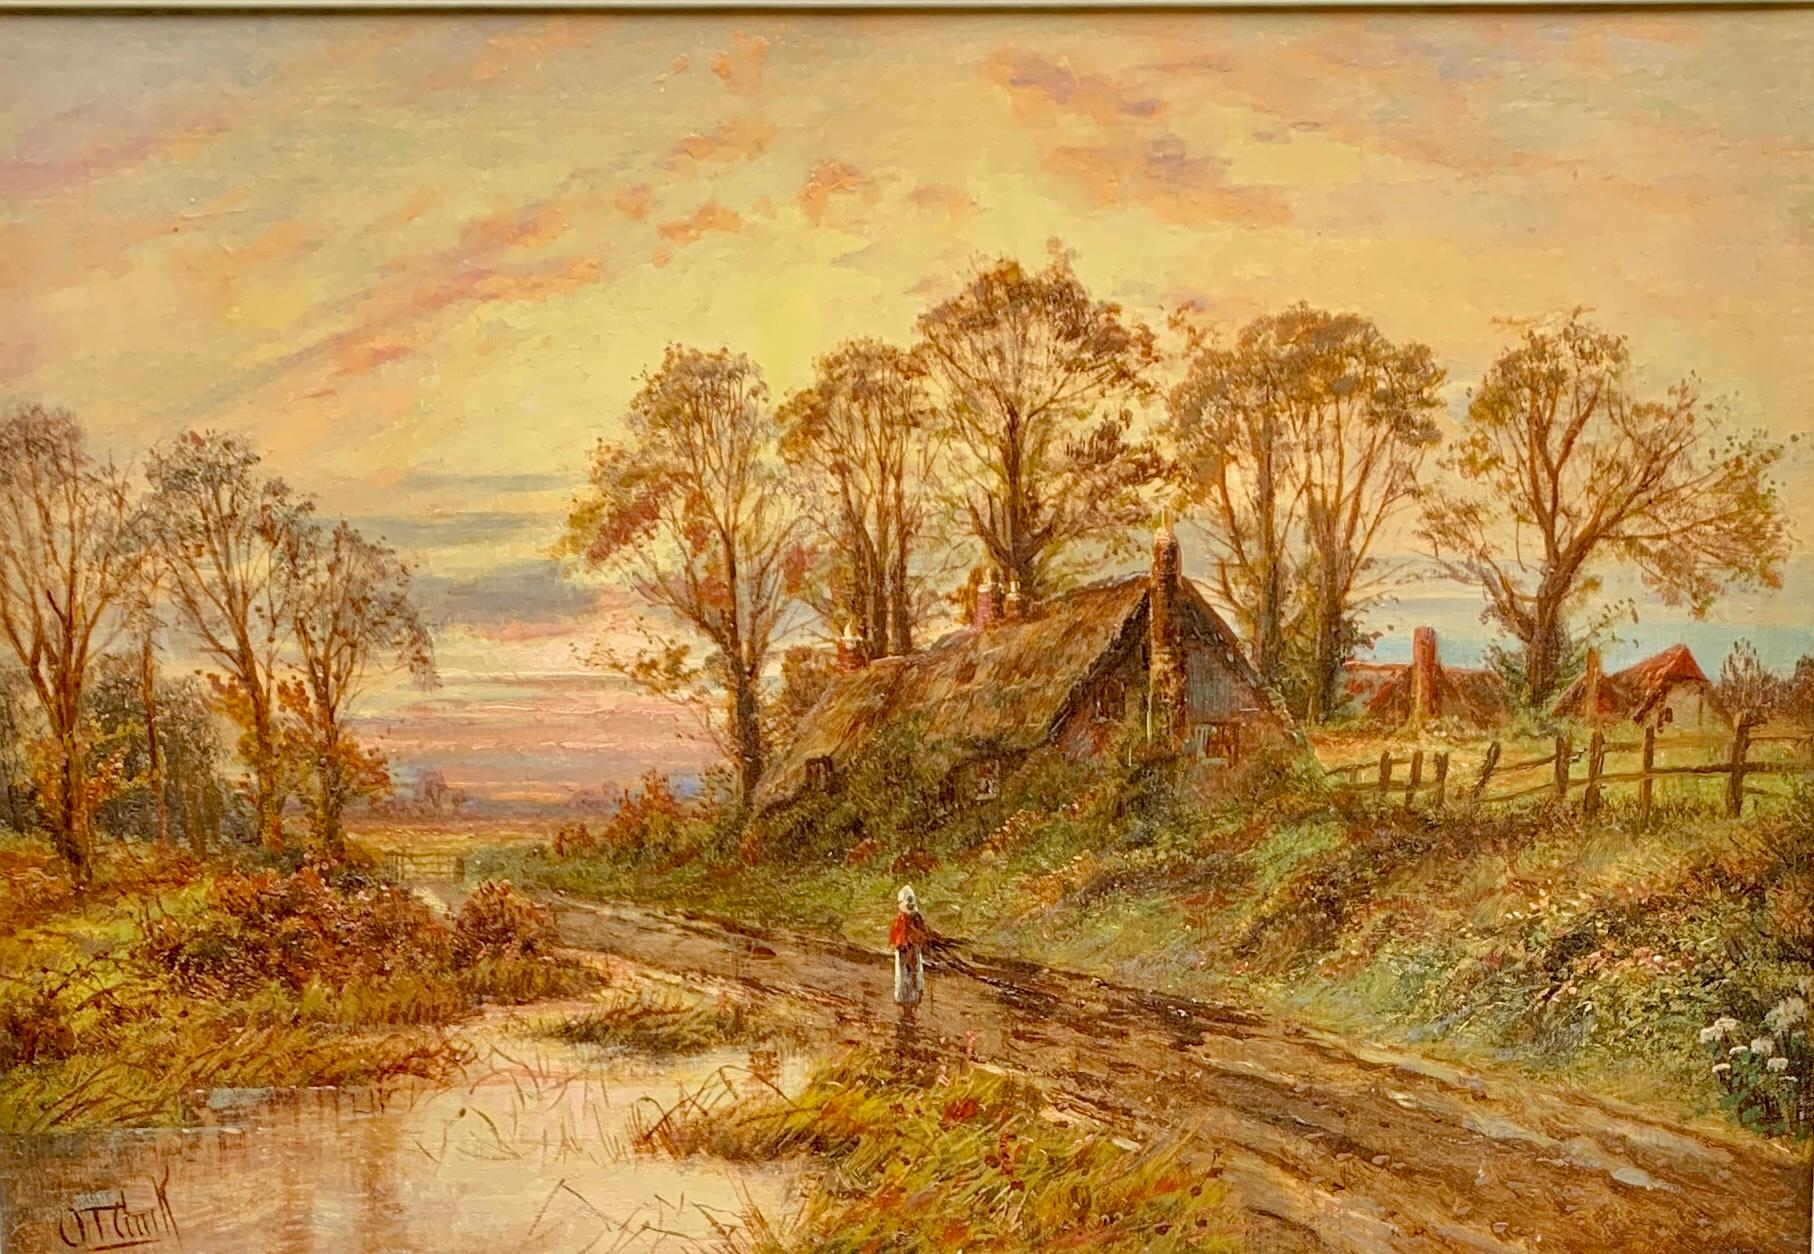 19th century Victorian English landscape with thatched cottage, figure at sunset - Painting by Octavius T. Clark